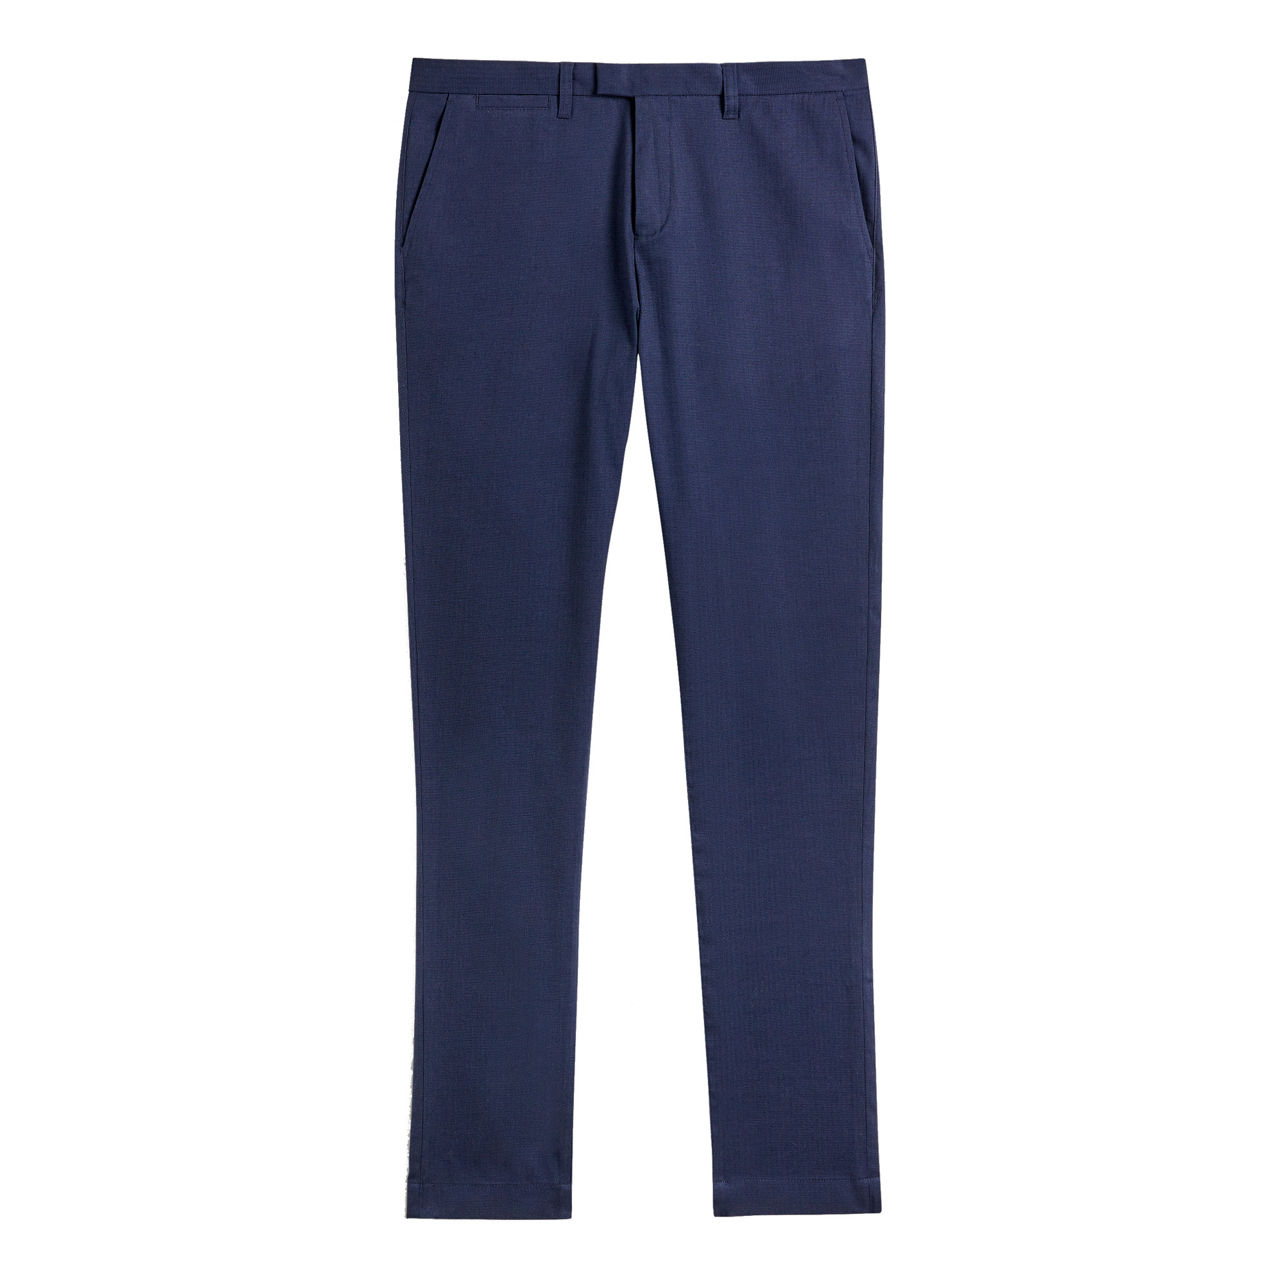 TED BAKER Gretton Irvine Fit Smart Chinos